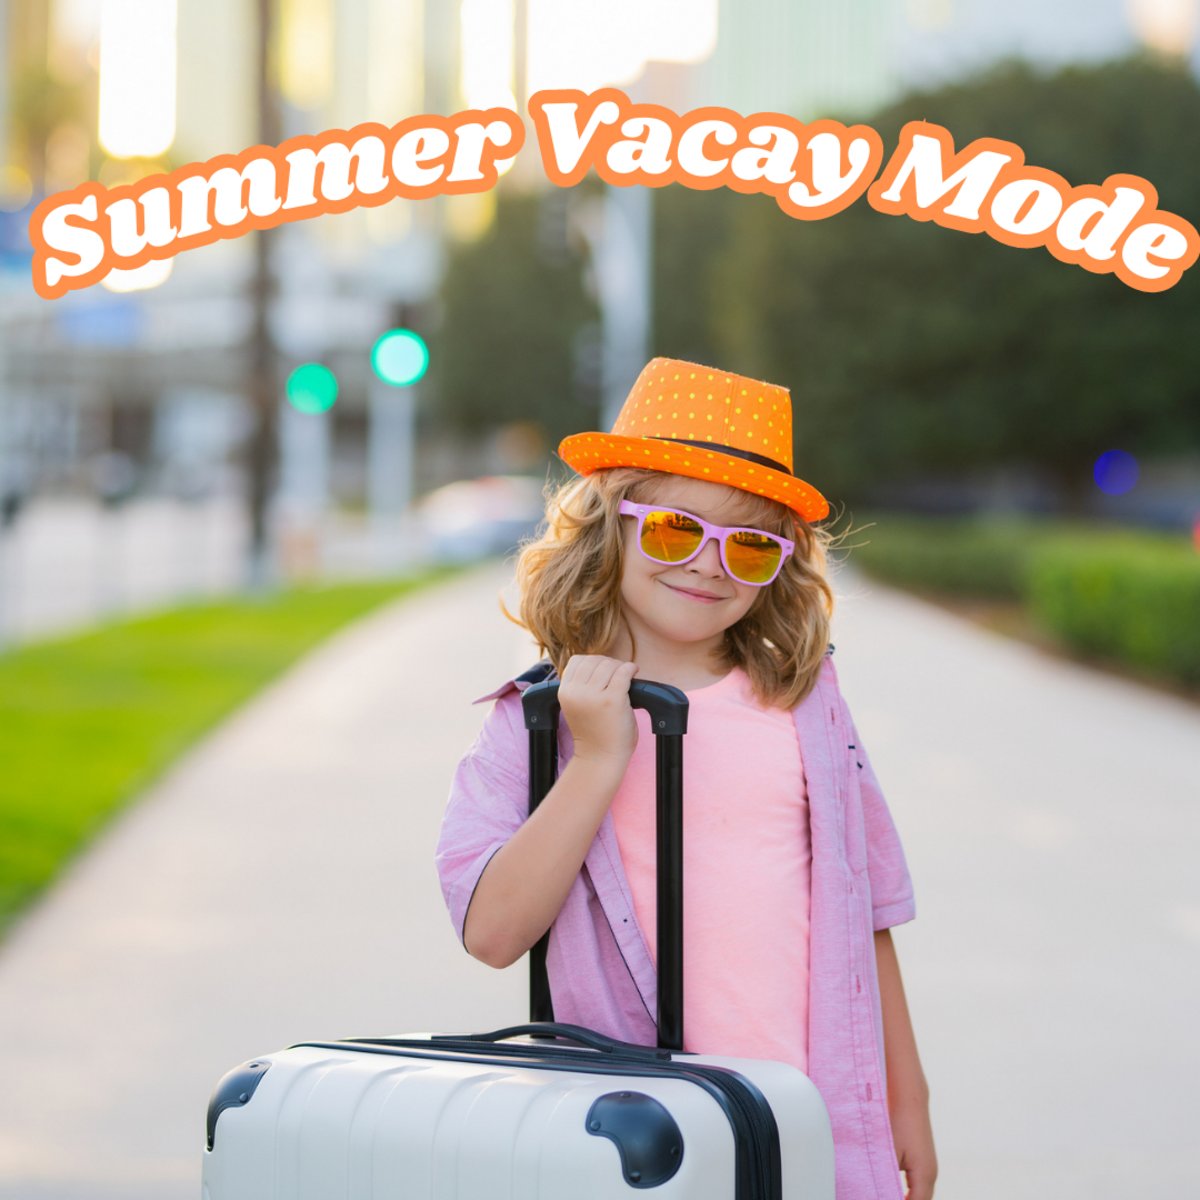 It's time to start planning your family summer  Florida vacation. Go ahead and book your room now. Just click here: marriott.com/hotels/travel/… #summervacay